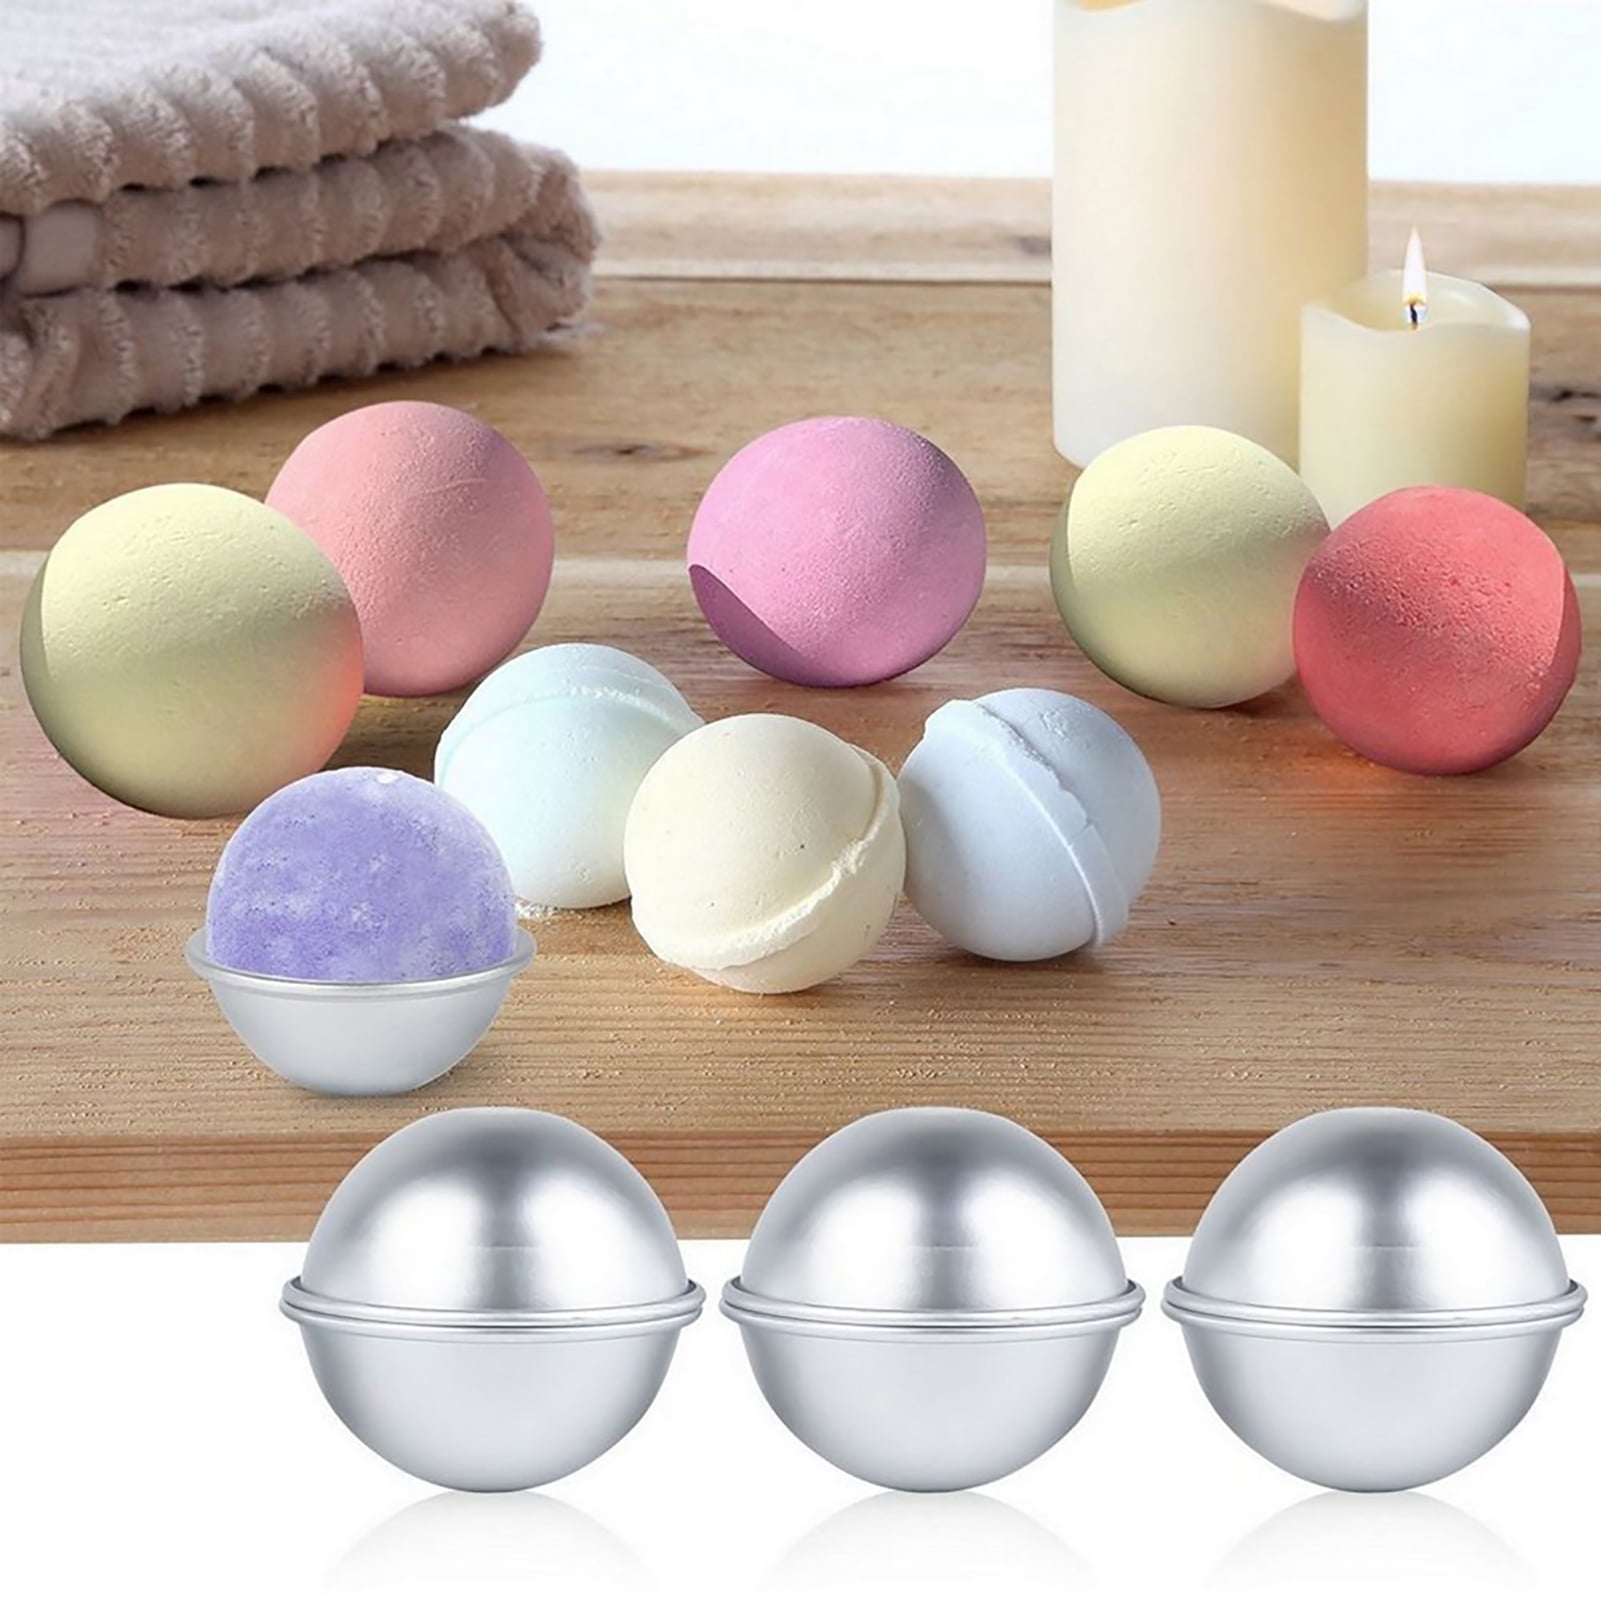 12 Pieces Metal Bath Bomb Molds Bath Ball Molds for Crafts Bath Bomb  Handmade Soaps Candle Cake Ice Cream Baking Handicrafts Making Supplies  (1.77